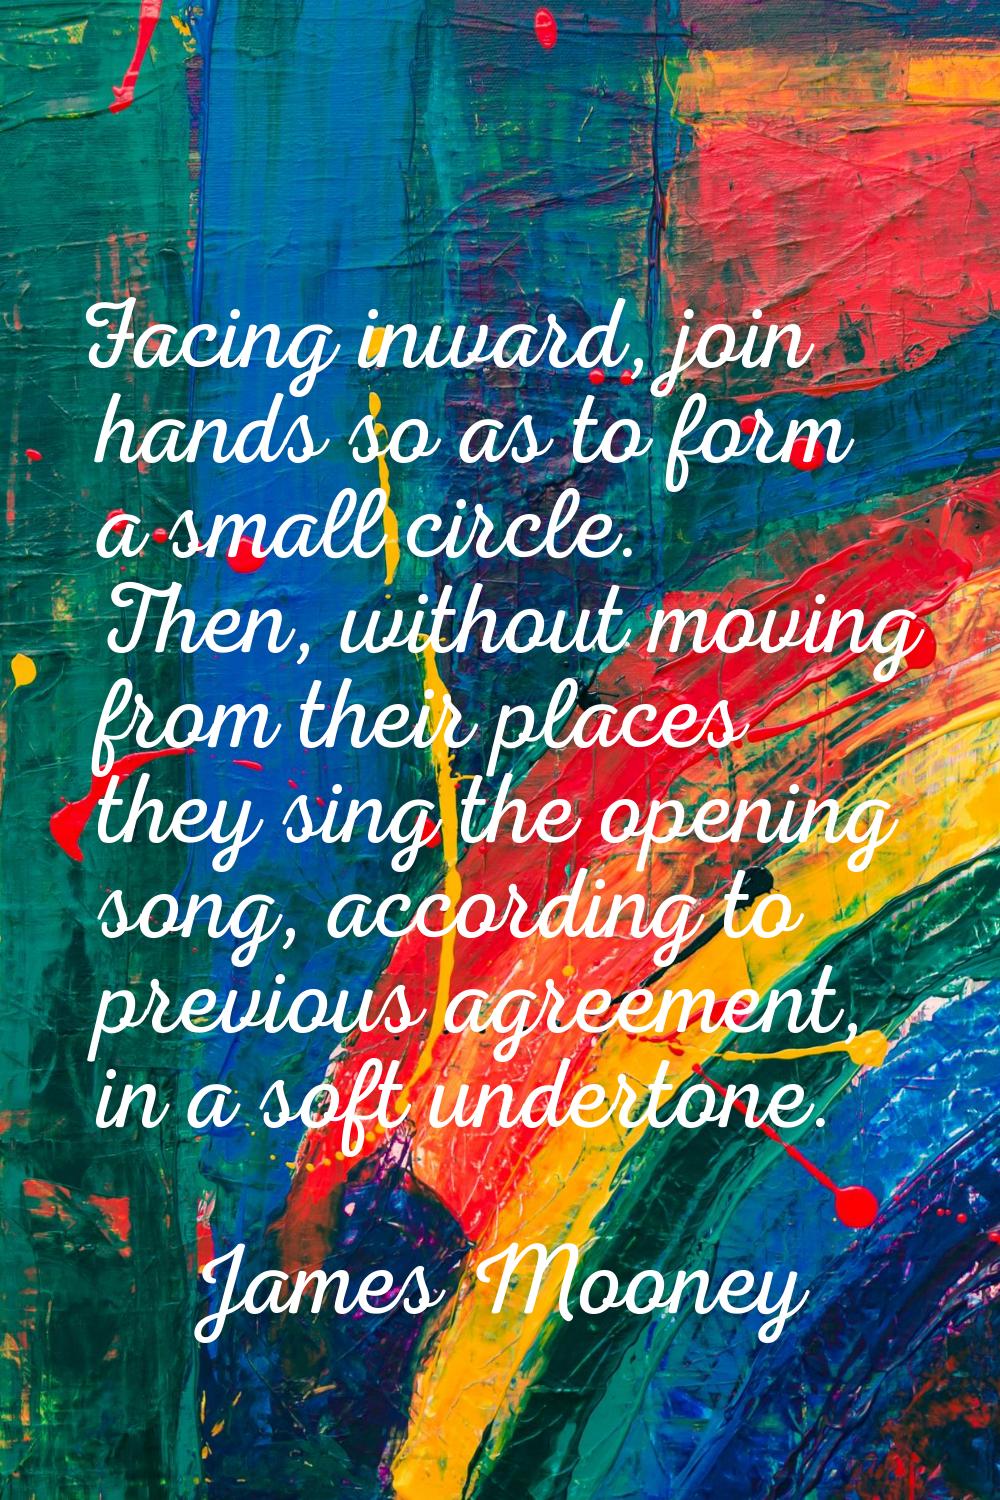 Facing inward, join hands so as to form a small circle. Then, without moving from their places they